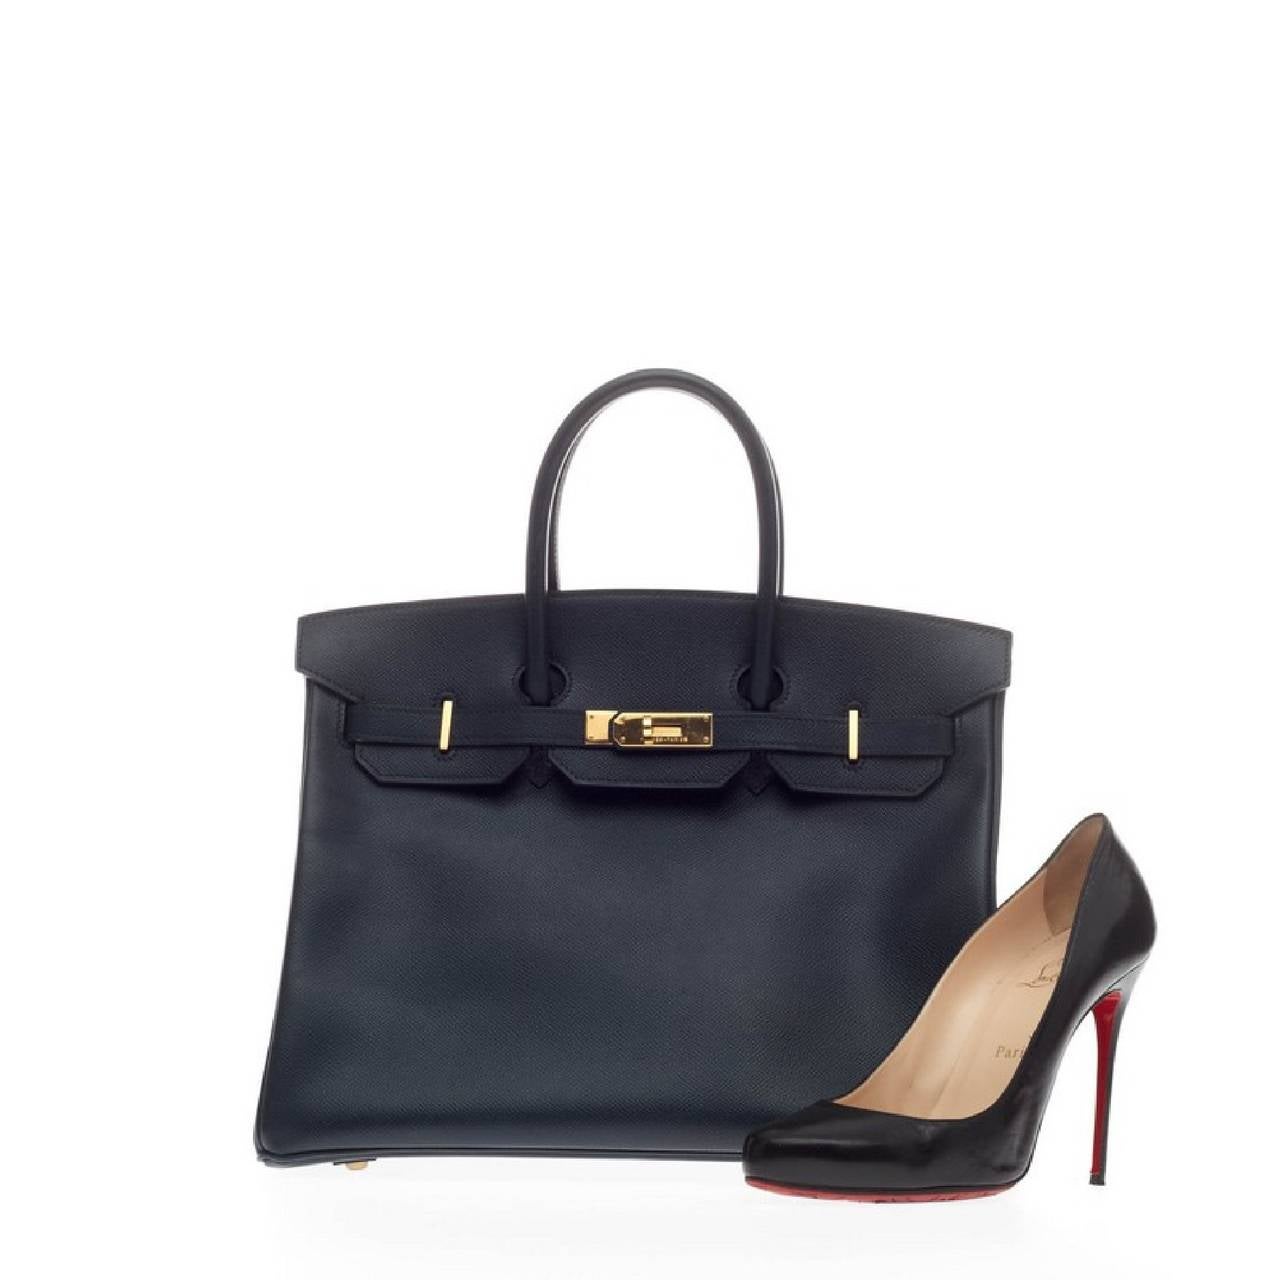 This authentic Hermes Birkin Bleu Marine Courchevel with Gold Hardware 35 is one of the most desired items of any fashionista. Finely crafted in courchevel stamped leather in stunning navy bleu marine, this coveted bag features rolled leather top